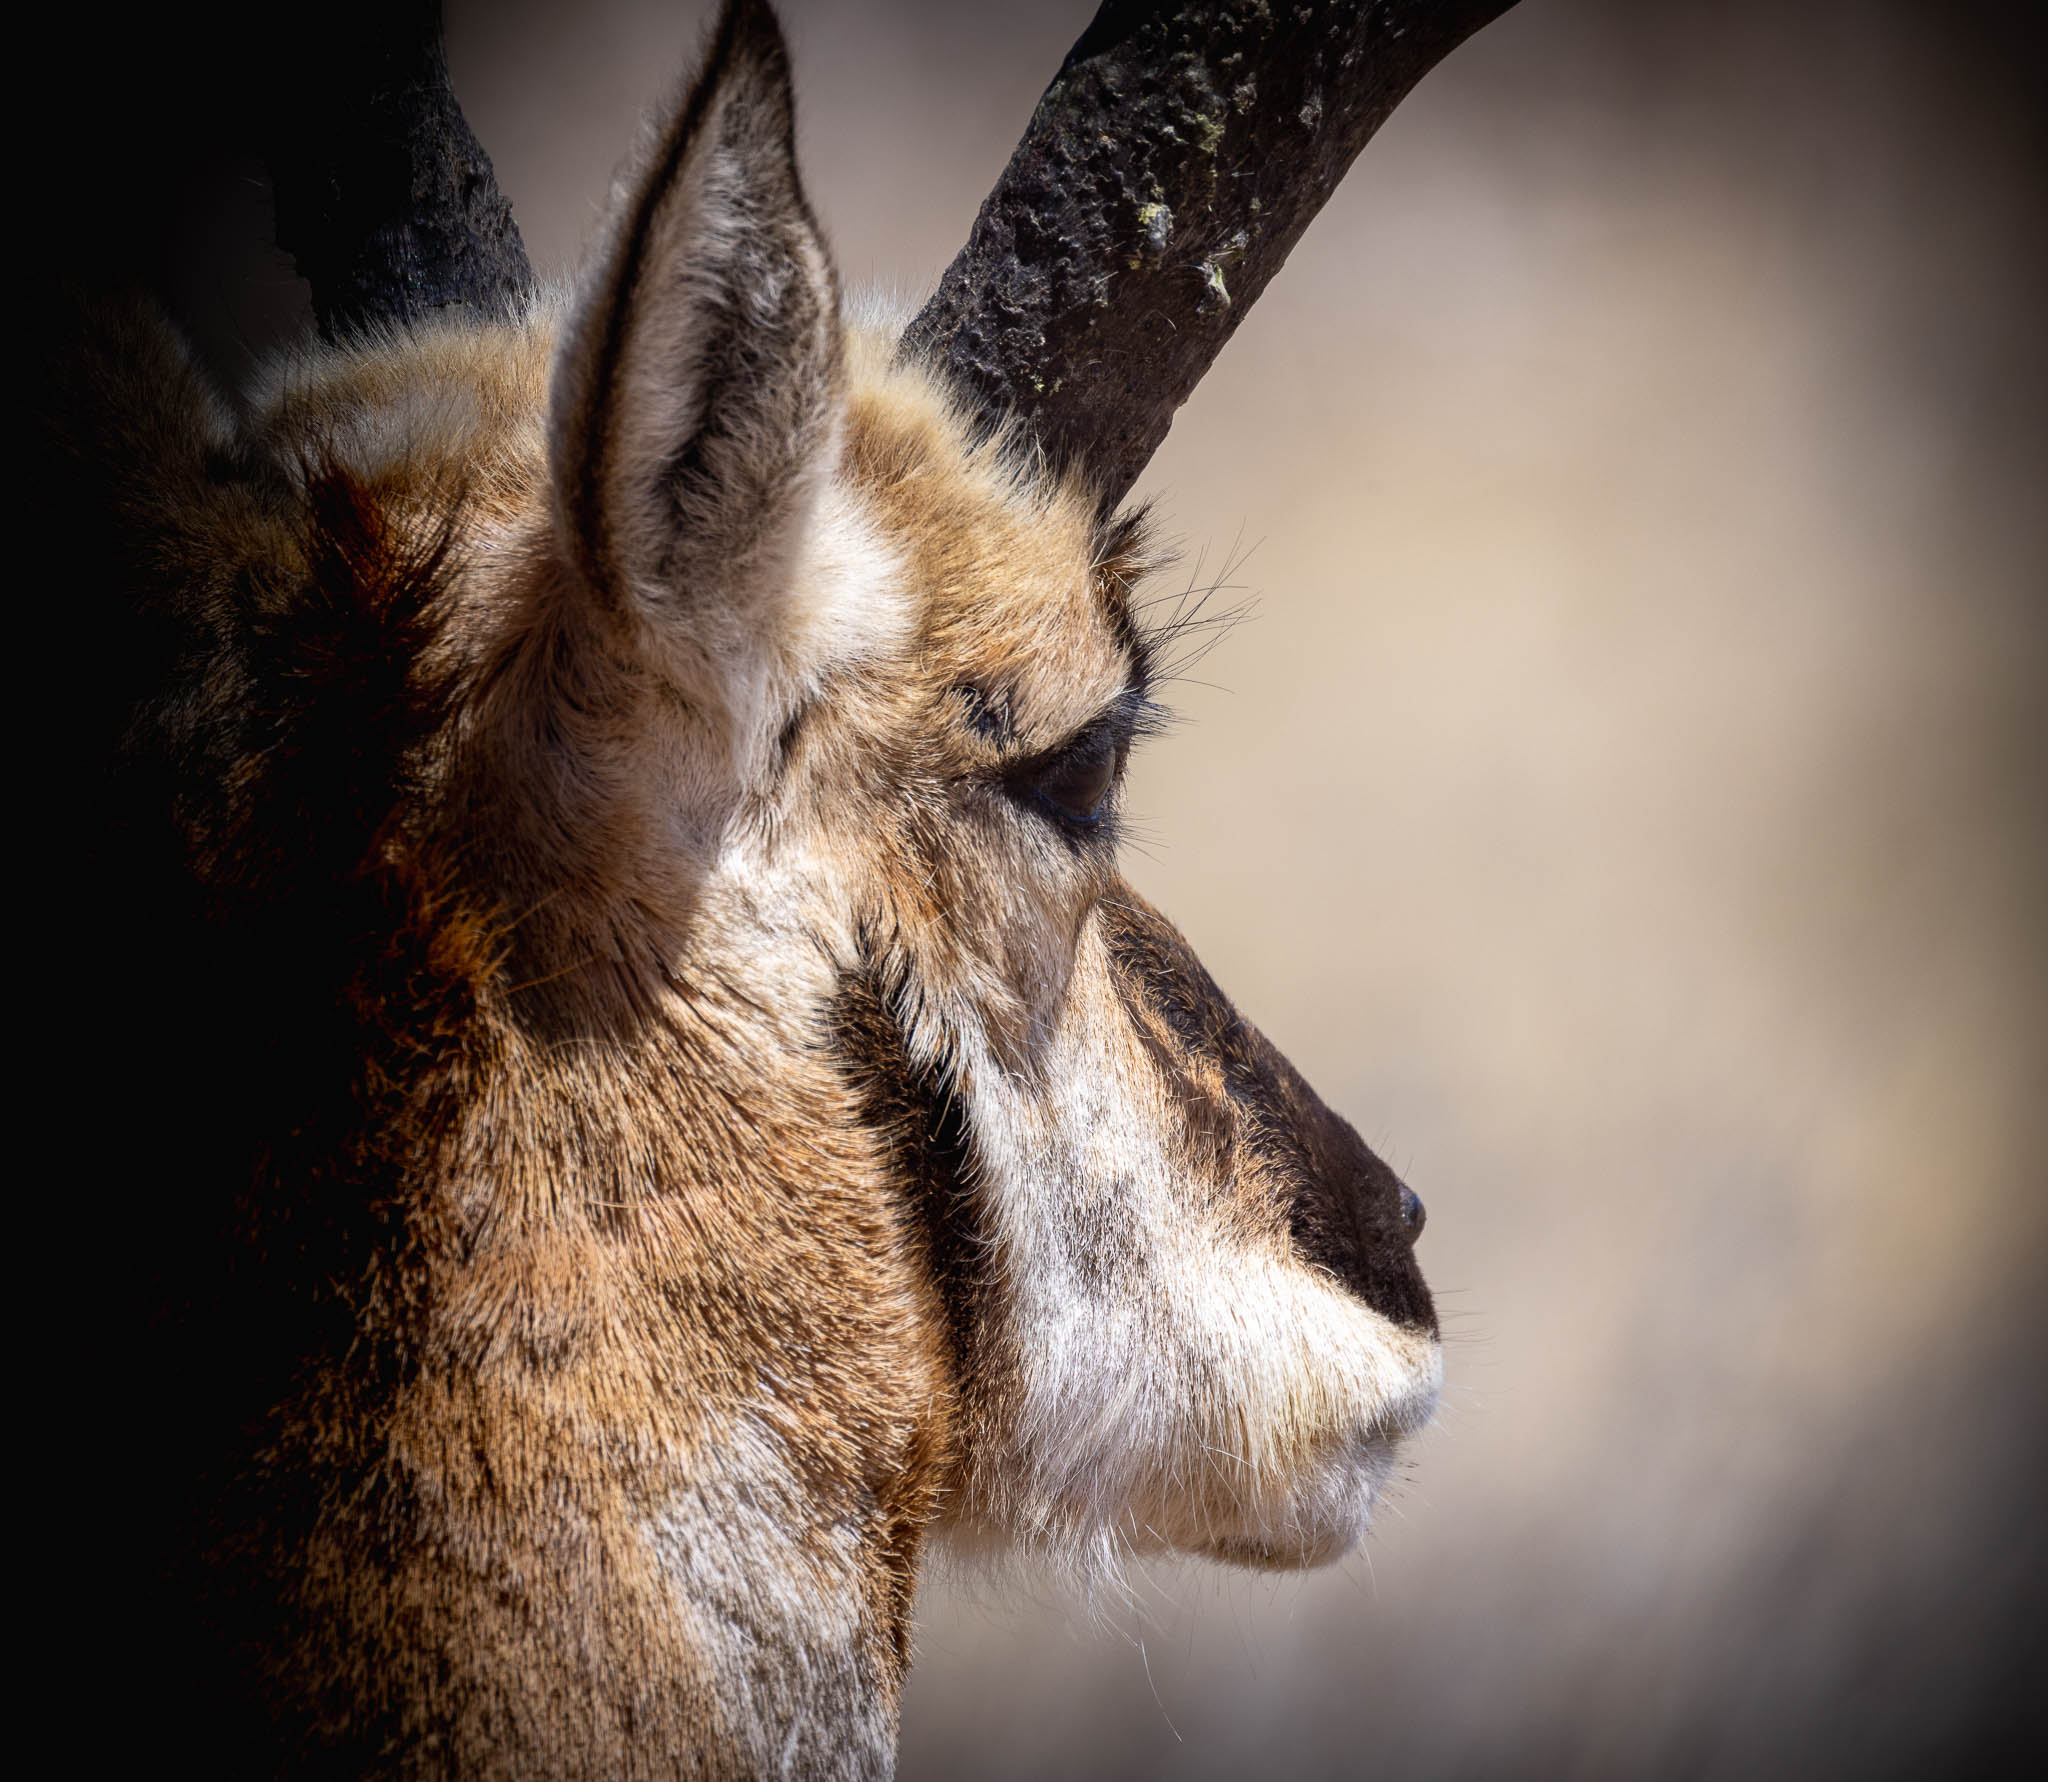 Pronghorn Antelope, Lost in Thought, Ouray National Wildlife Refuge, Ouray UT, April 29, 2022